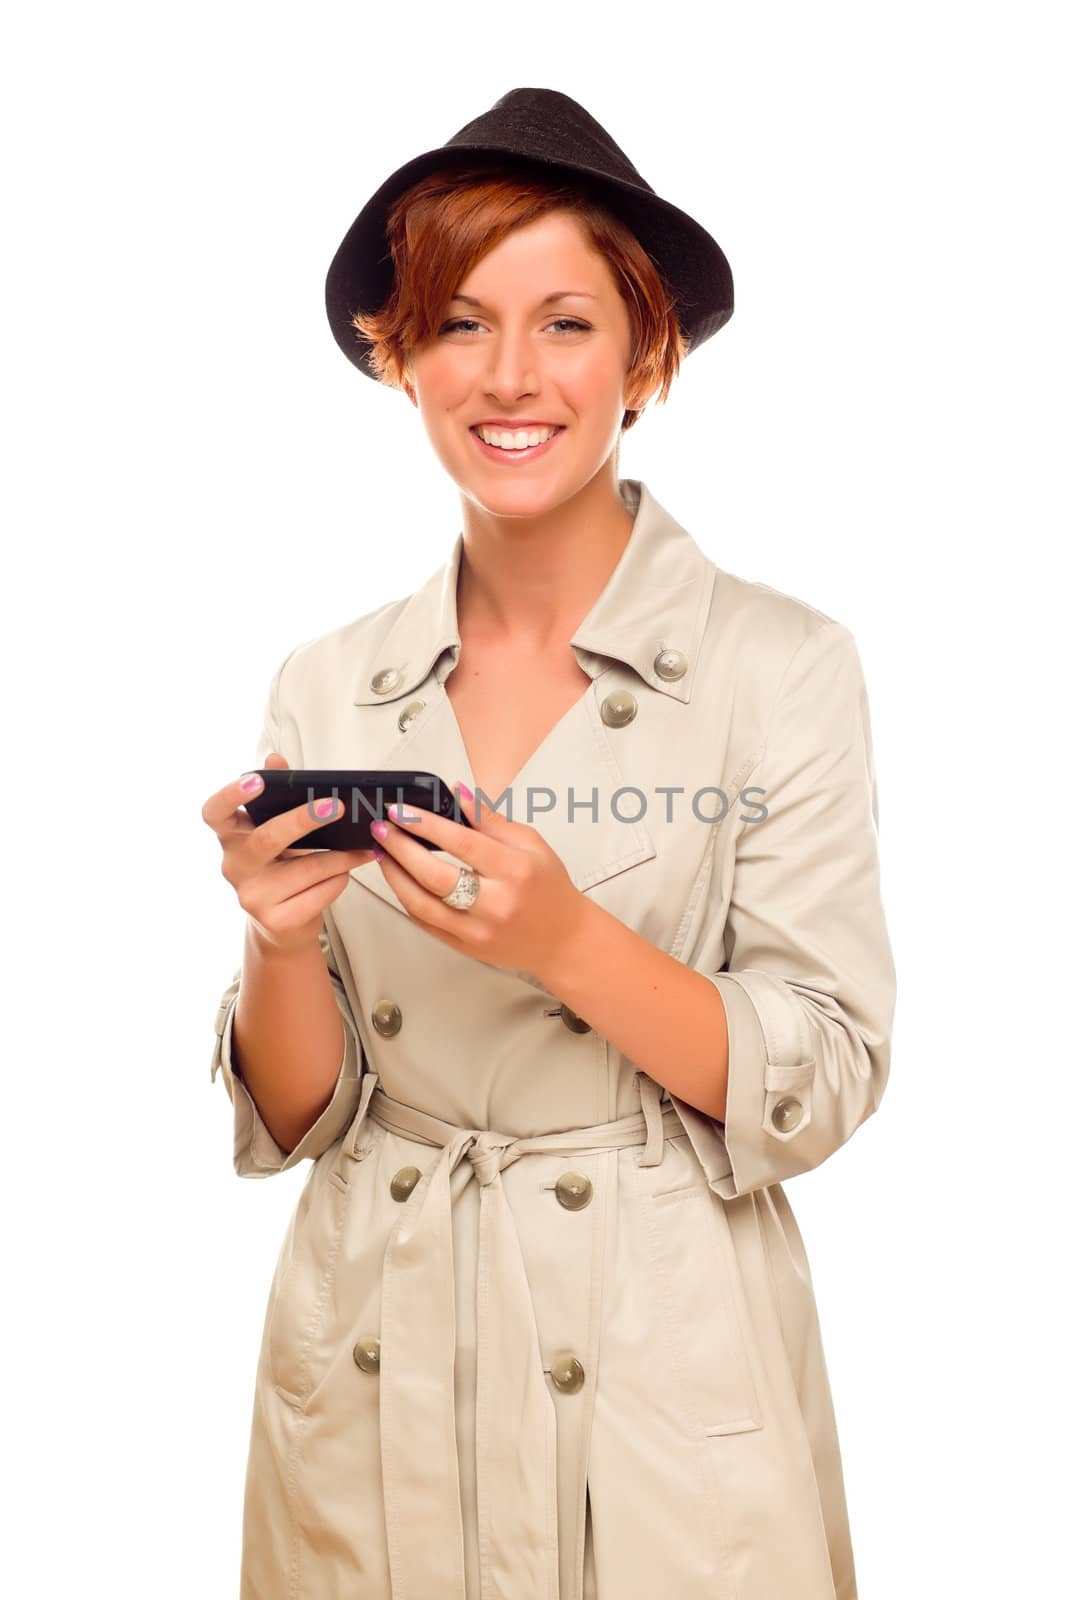 Smiling Young Woman Holding Smart Cell Phone on White by Feverpitched